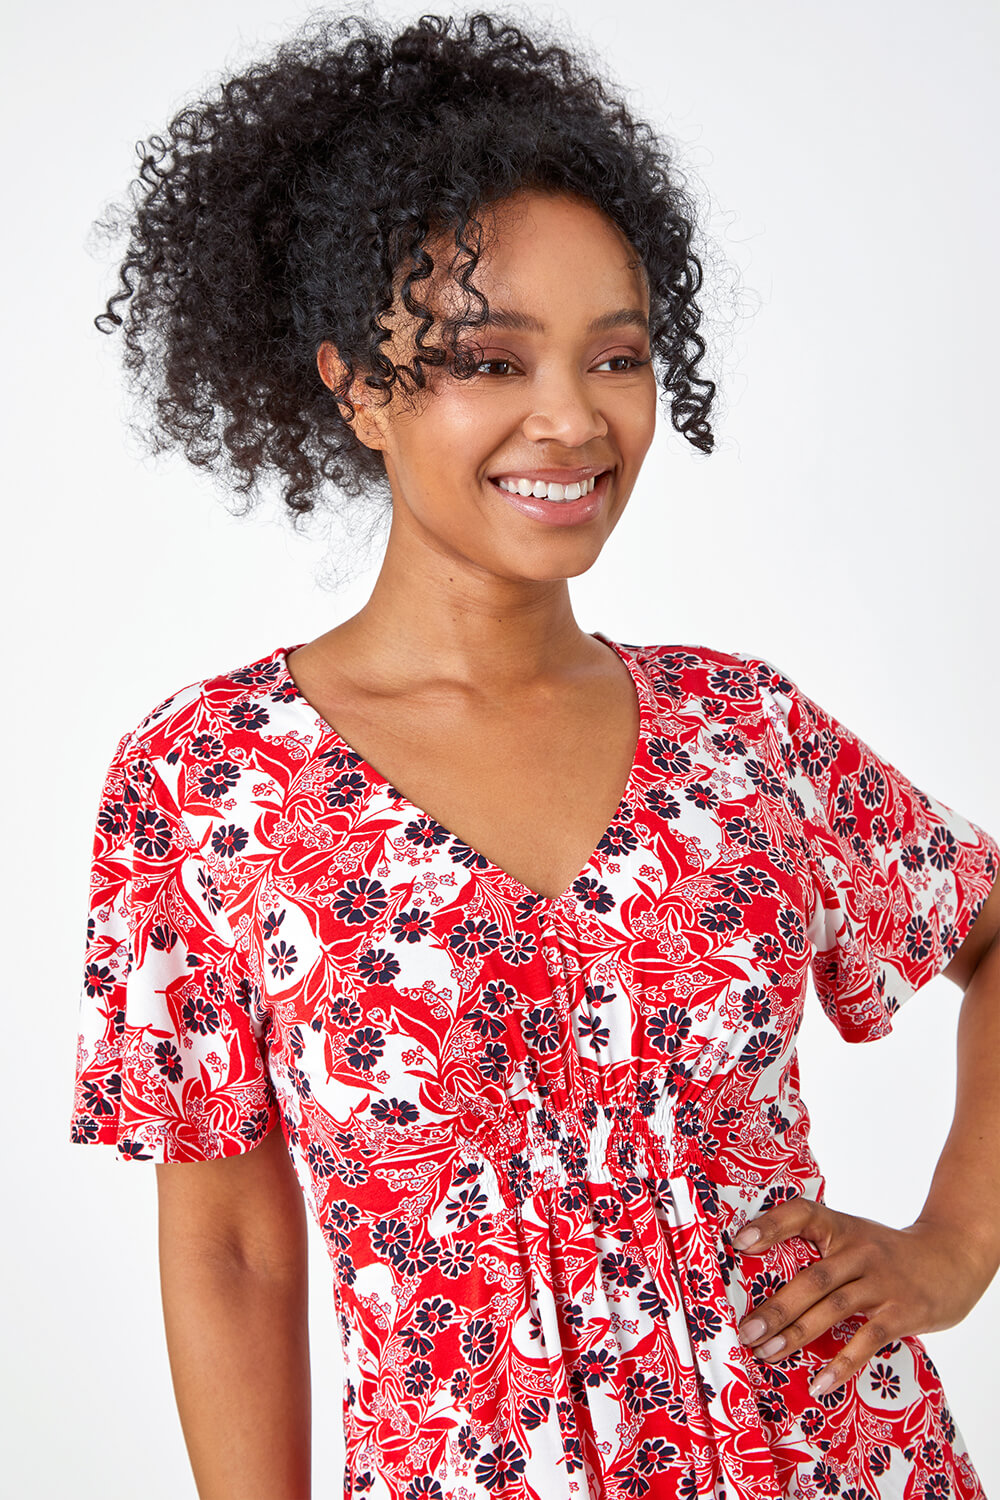 Red Petite Floral Print Stretch T-Shirt, Image 4 of 4